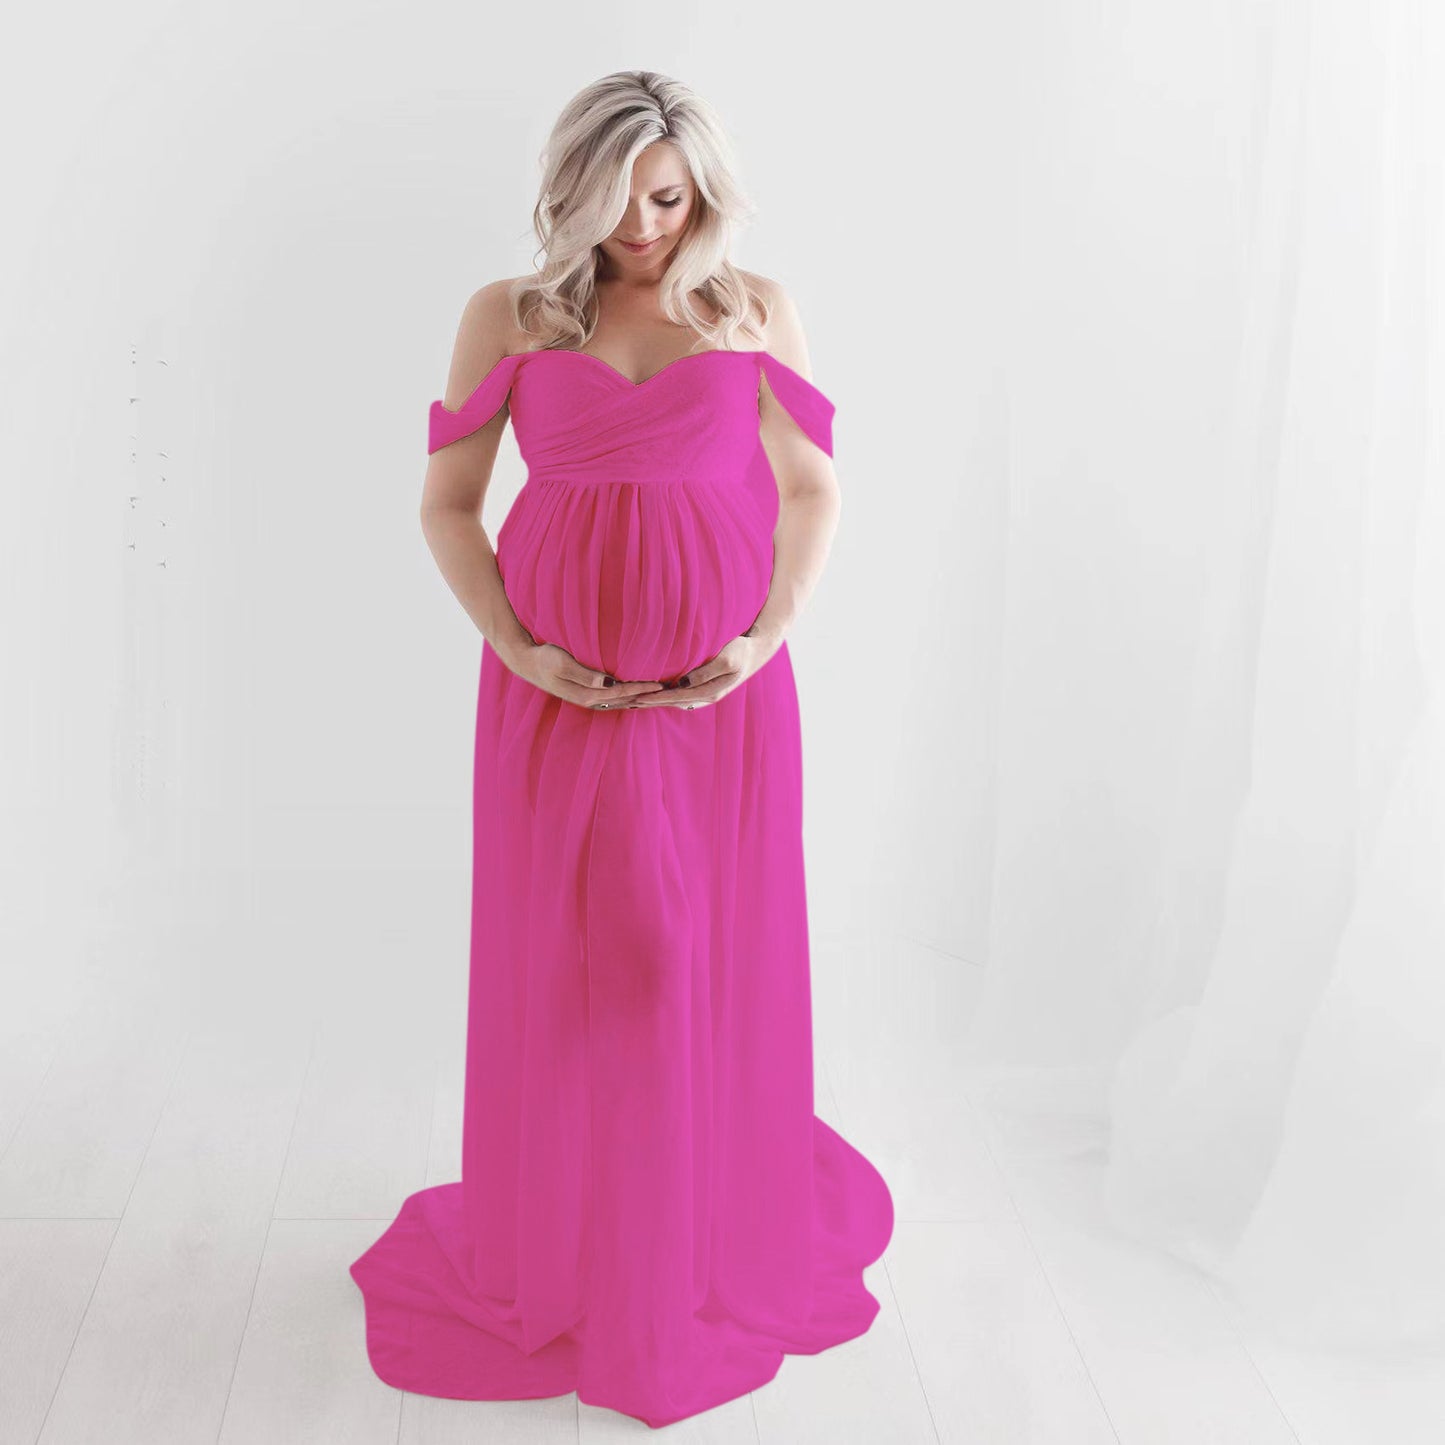 Maternity Portrait 2-in-1 Stretch Floor Length Maternity Photography Dress RB7